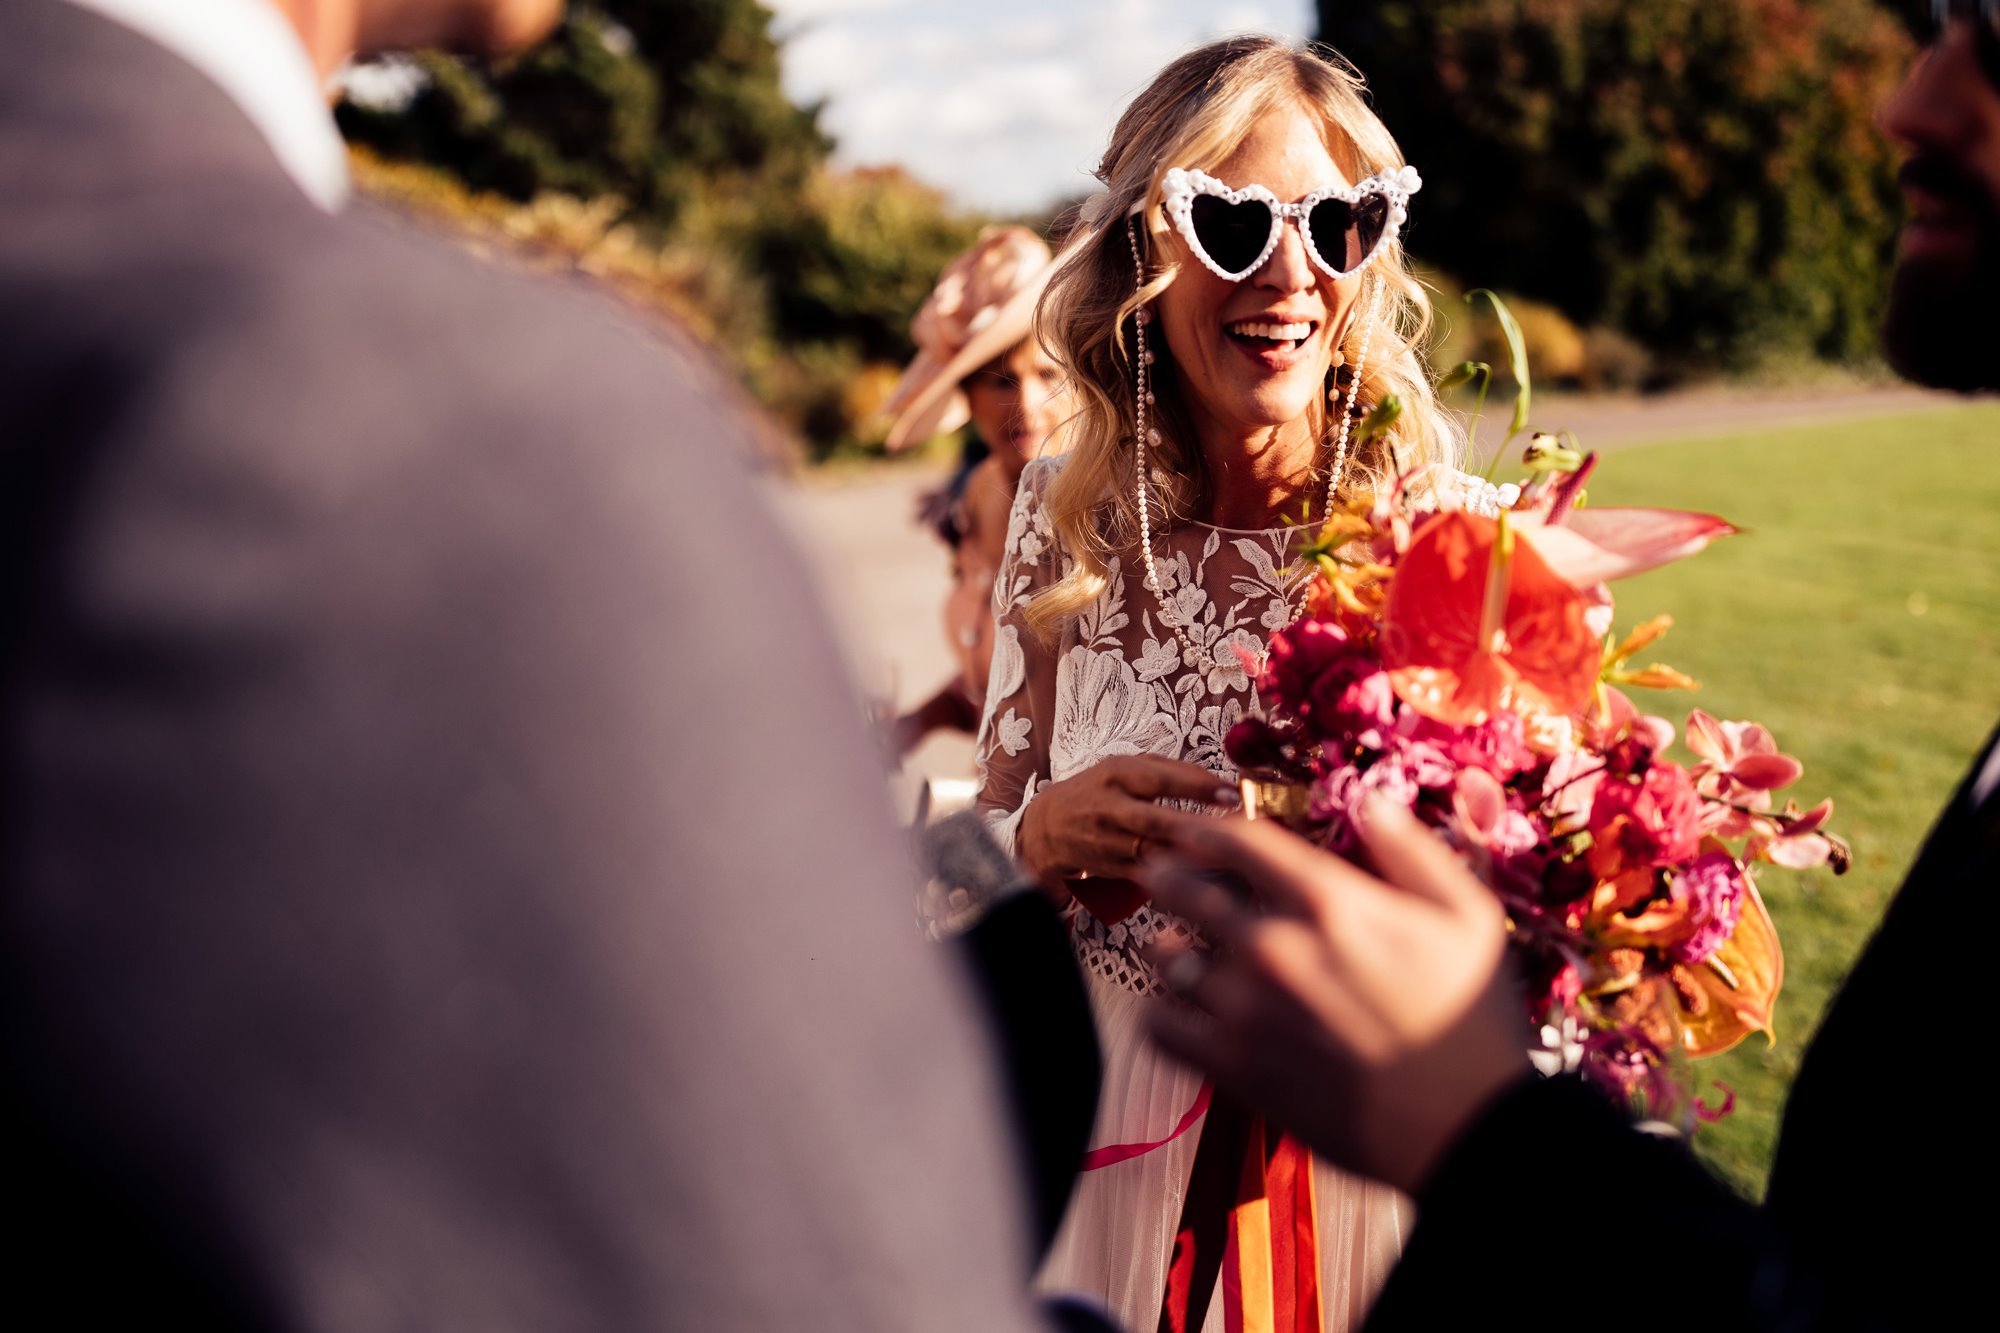 Bride with heart sunglasses carrying a lovely colourful bouquet